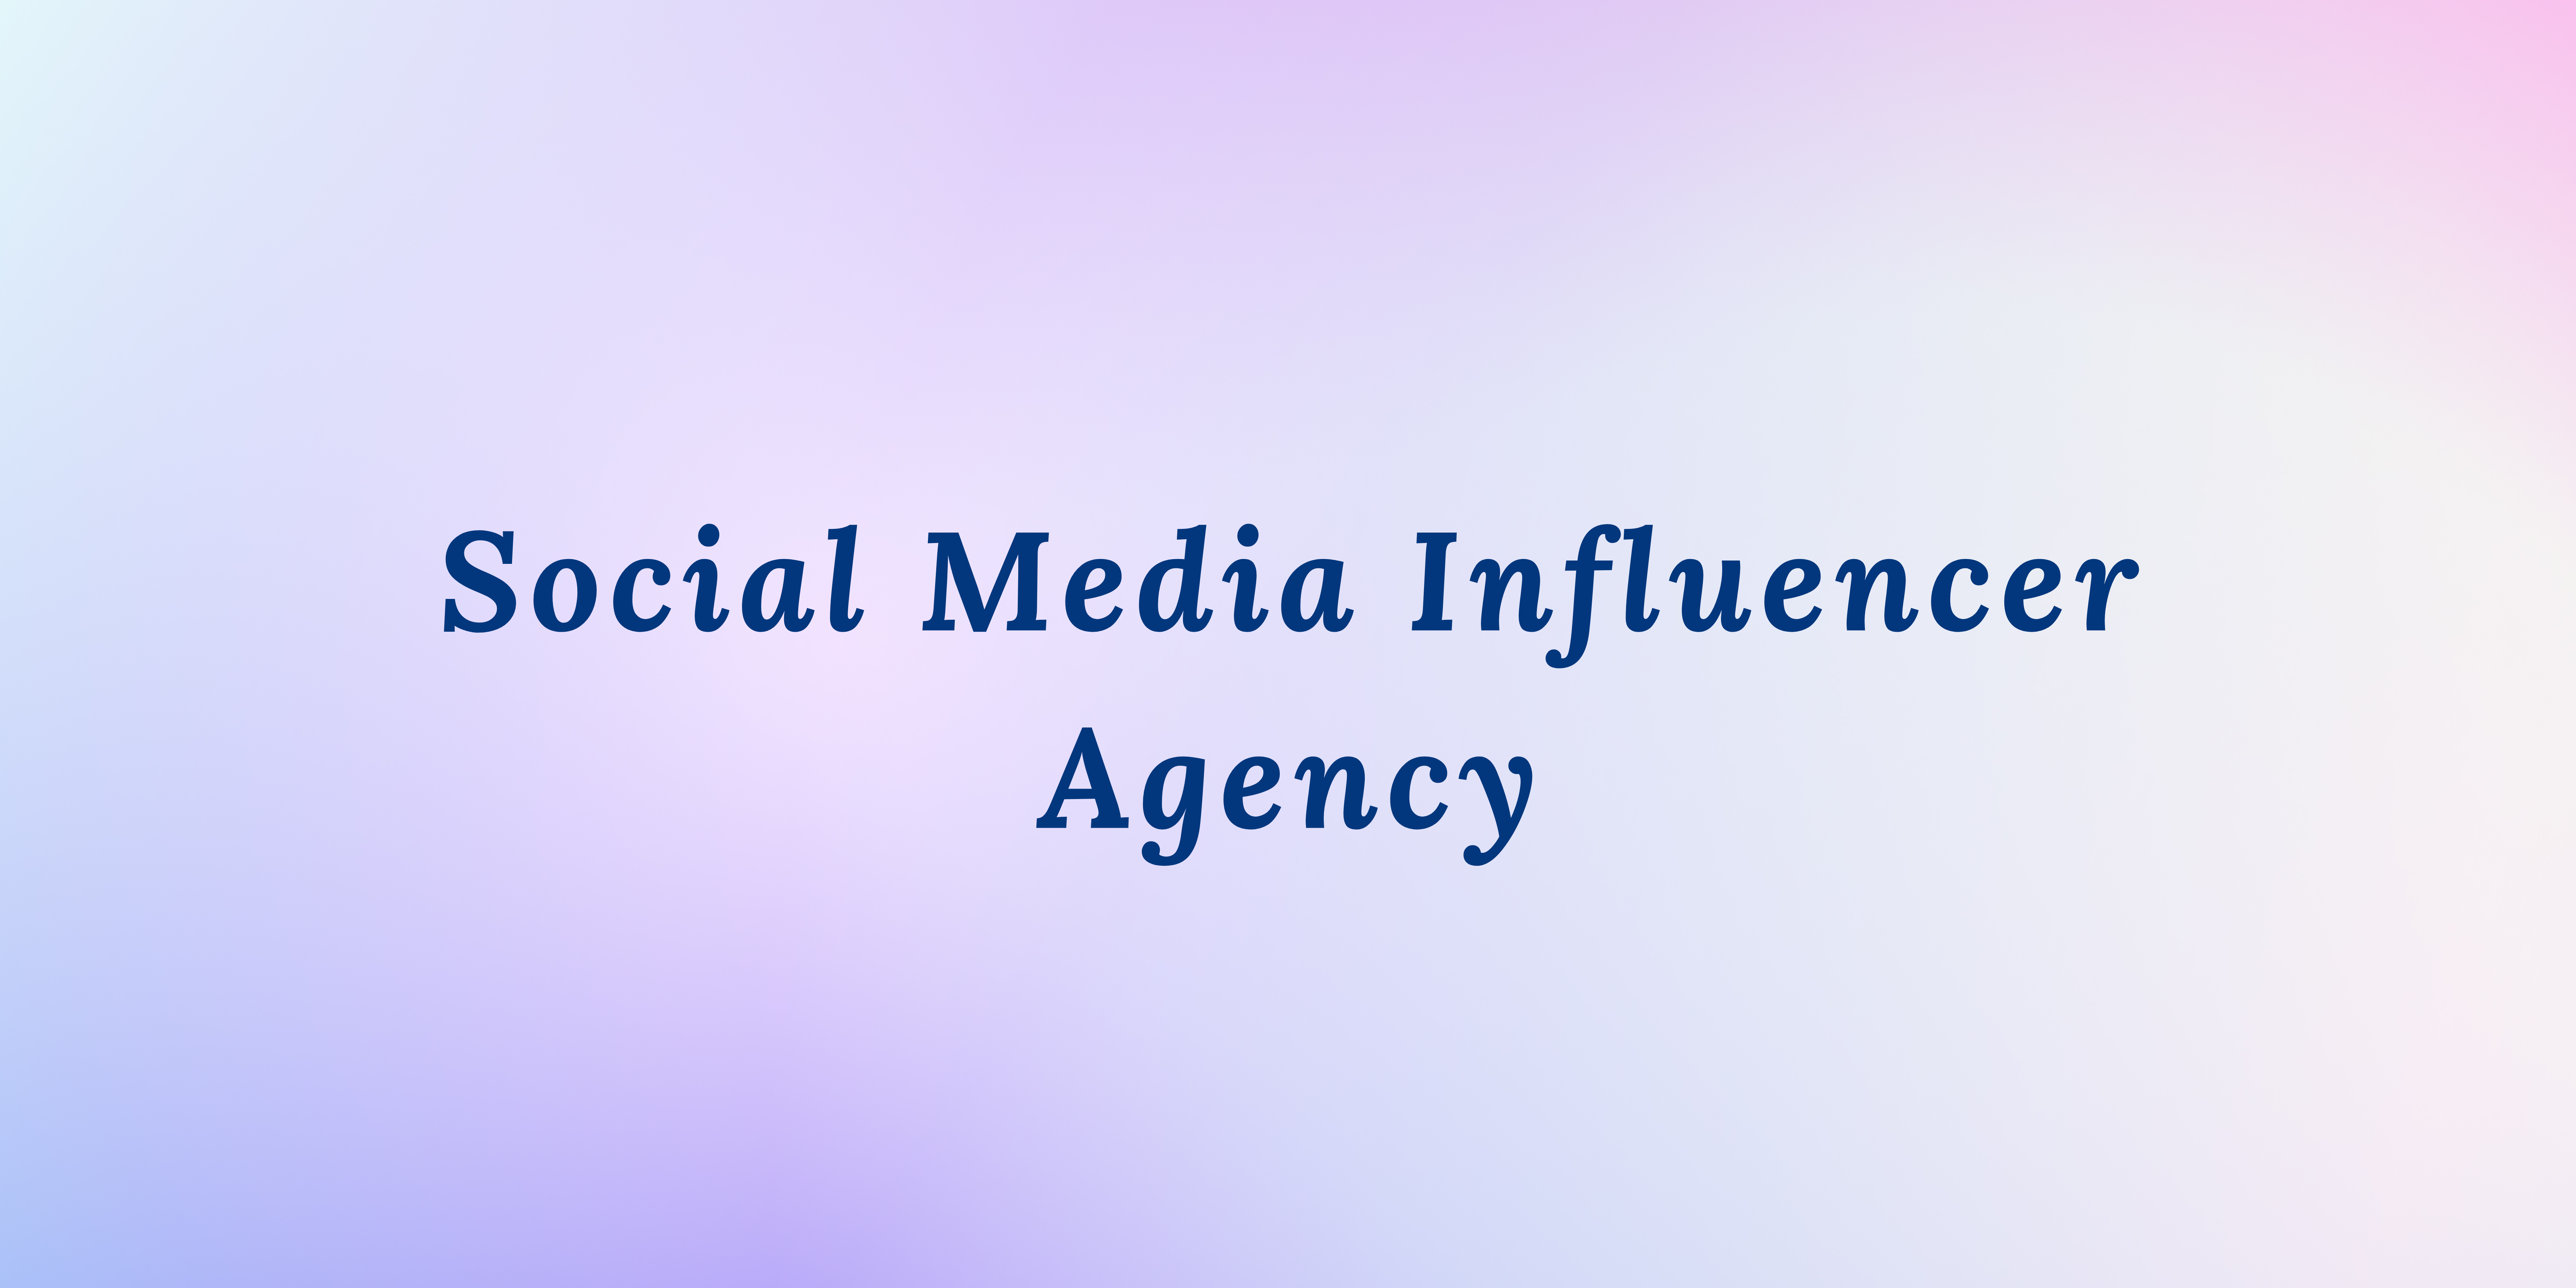 Why Does Your Brand Need a Social Media Influencer Agency?